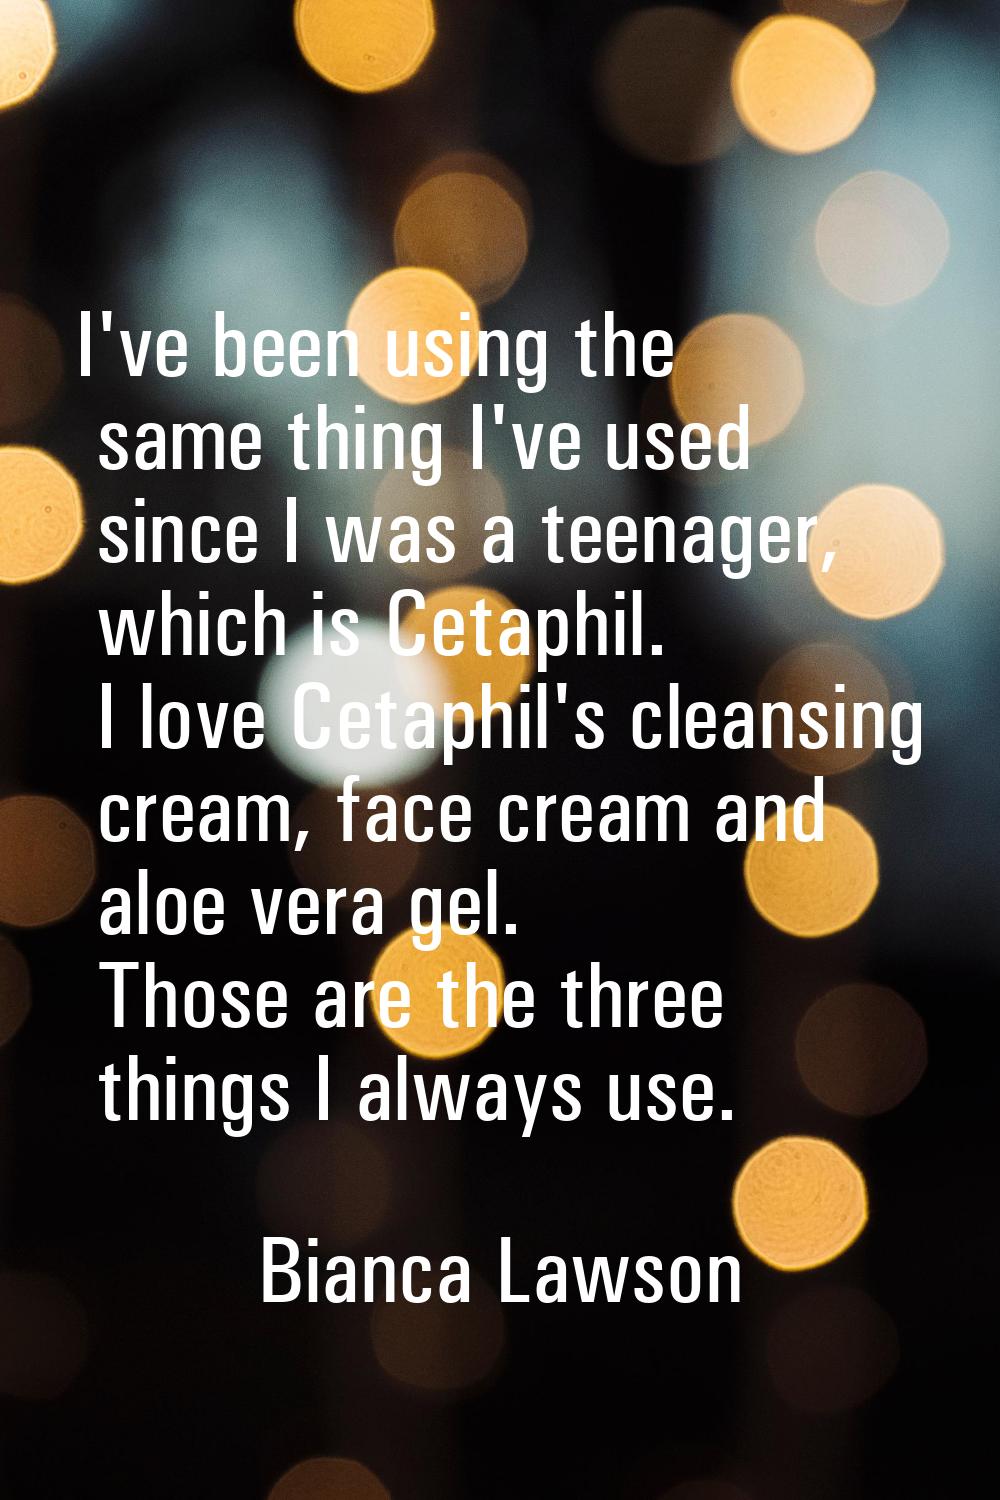 I've been using the same thing I've used since I was a teenager, which is Cetaphil. I love Cetaphil